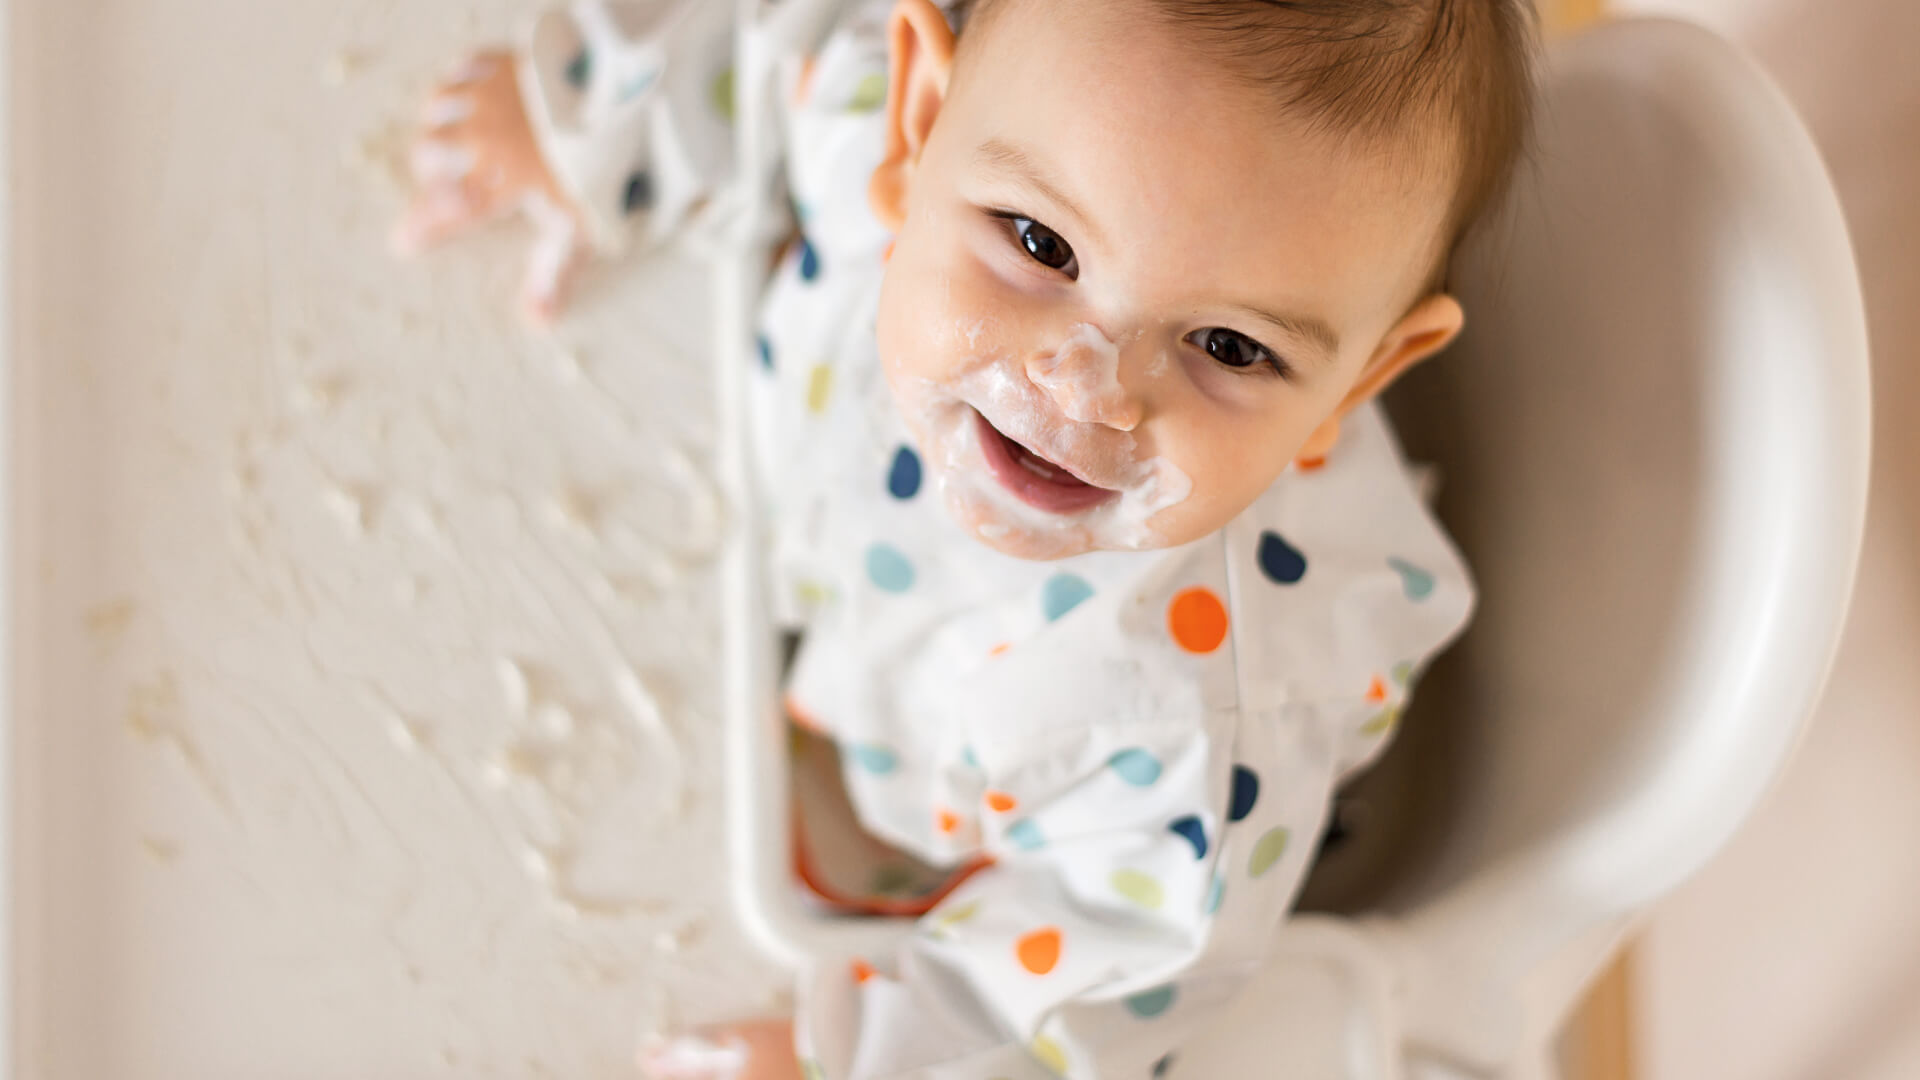 Guide to Baby-Led Weaning: Tips, Benefits and Foods